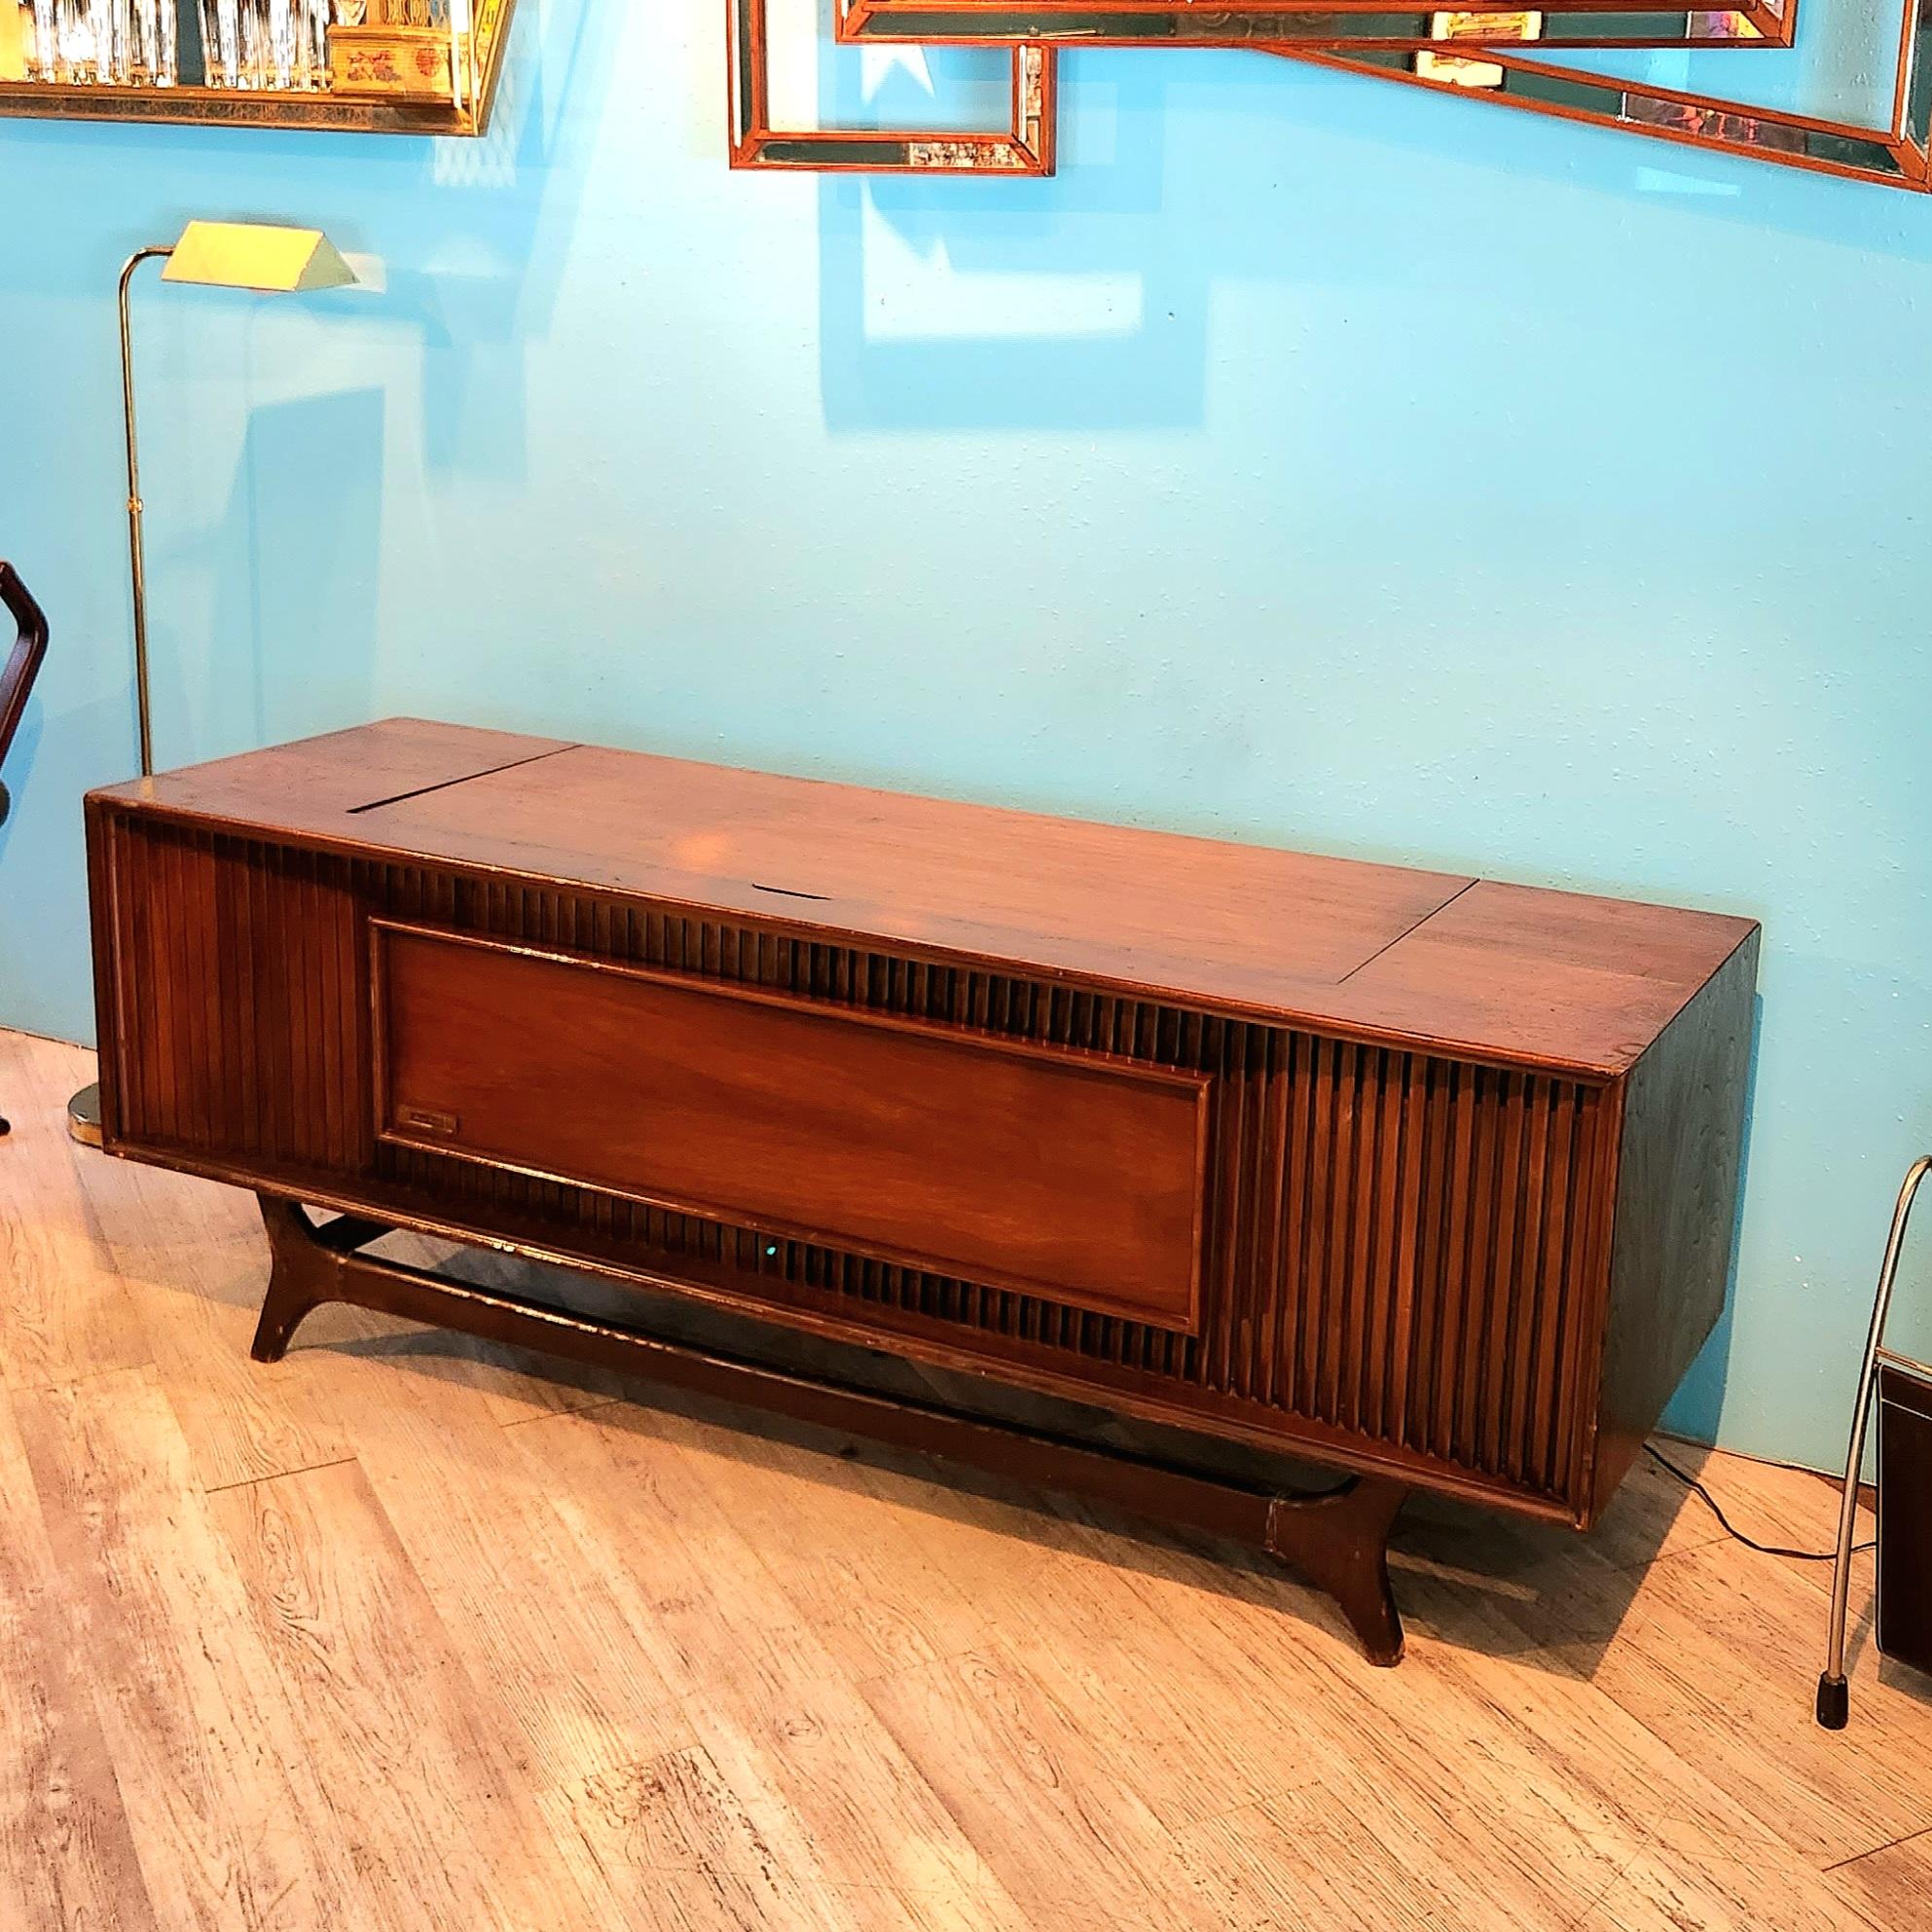 20th Century Mid-Century Modern Stereo Console Bar Ge Record Player Refurbed Bluetooth